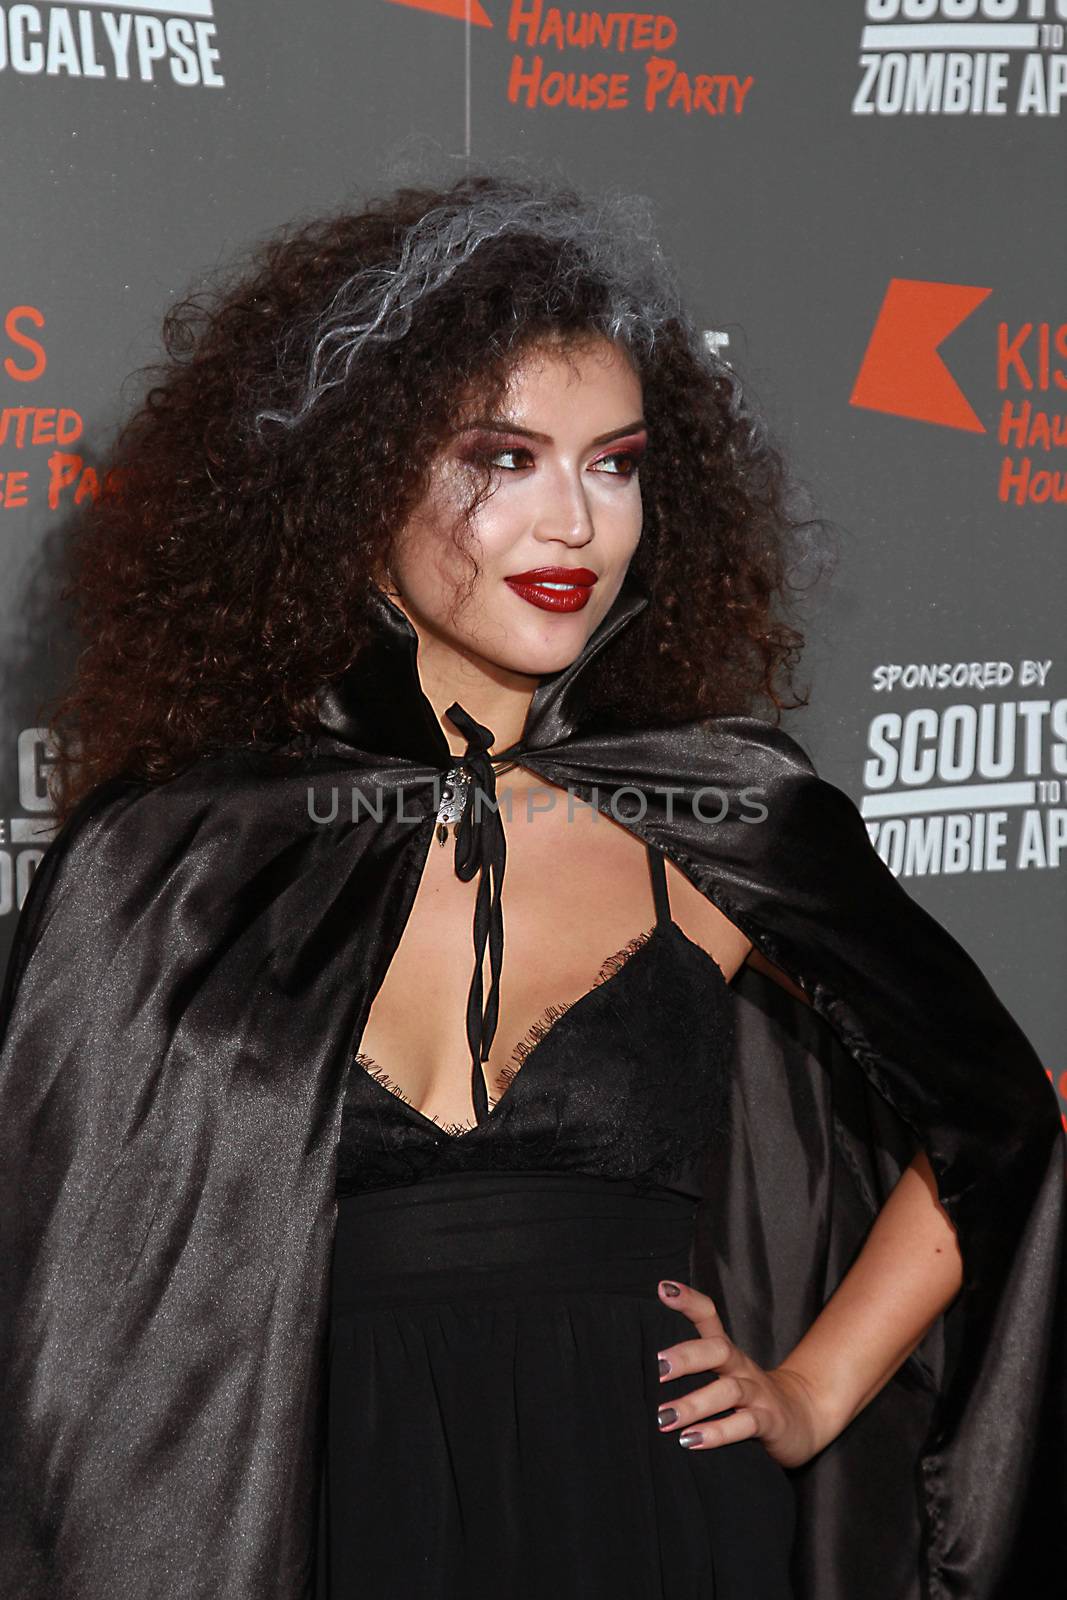 ENGLAND, London: Karen Harding attended the Kiss FM Haunted House Party in London on October 29, 2015. Costumes ranging from the Rock band KISS to the devil were on display as various stars walked the red carpet at the party which featured musical performances by Rita Ora, Jason Derulo and band Little Mix.